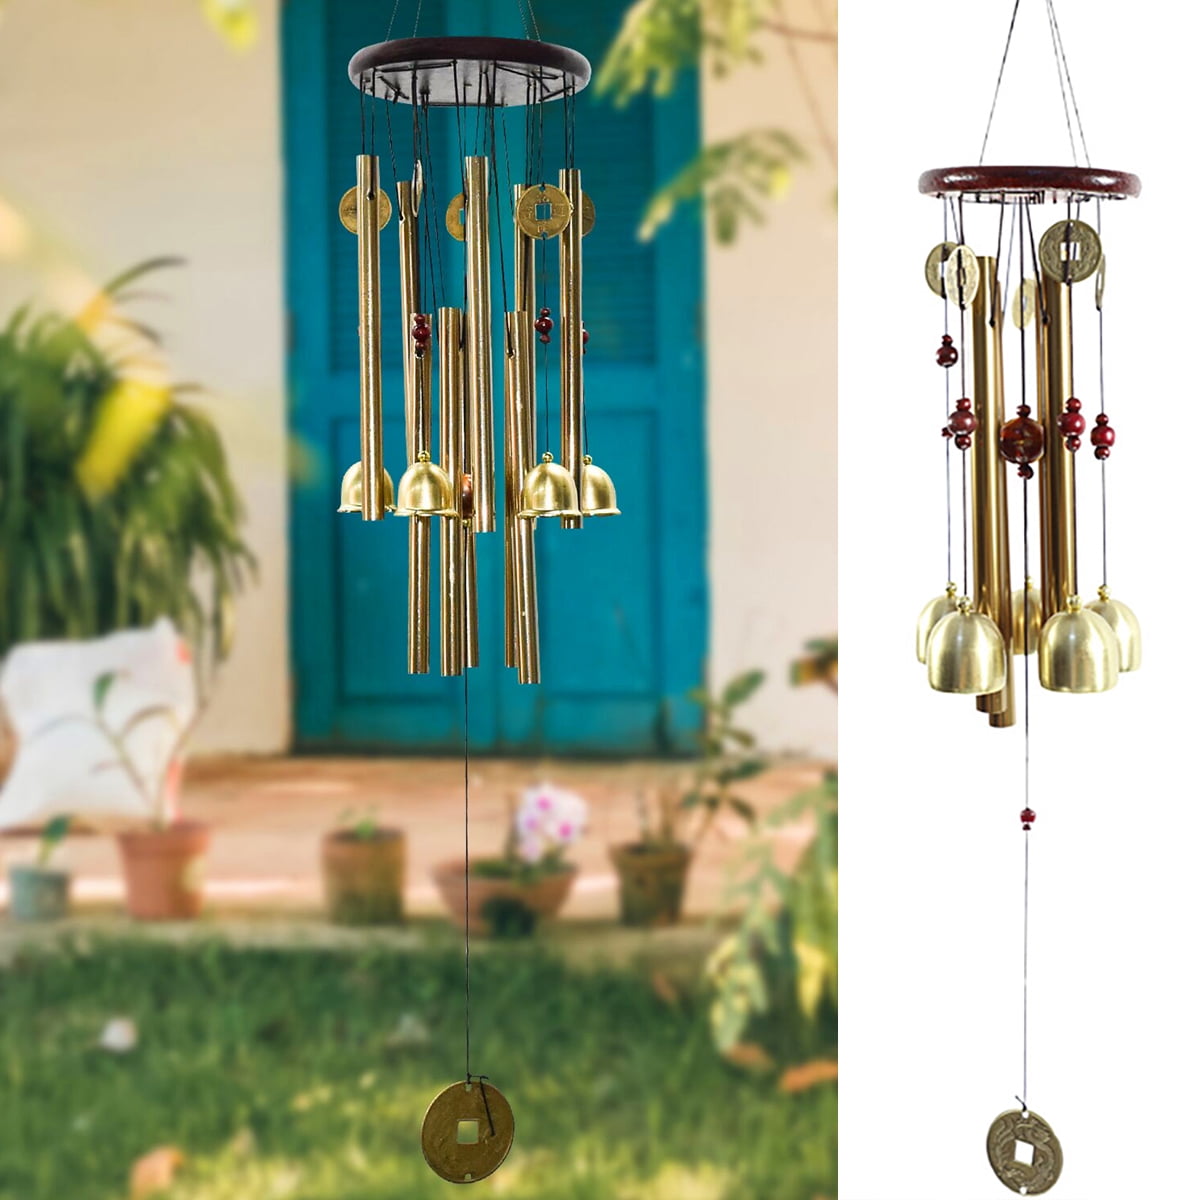 Tube Wind Chimes Mobile Wind chime Church Bell Outdoor Garden Hanging Decor Pick 